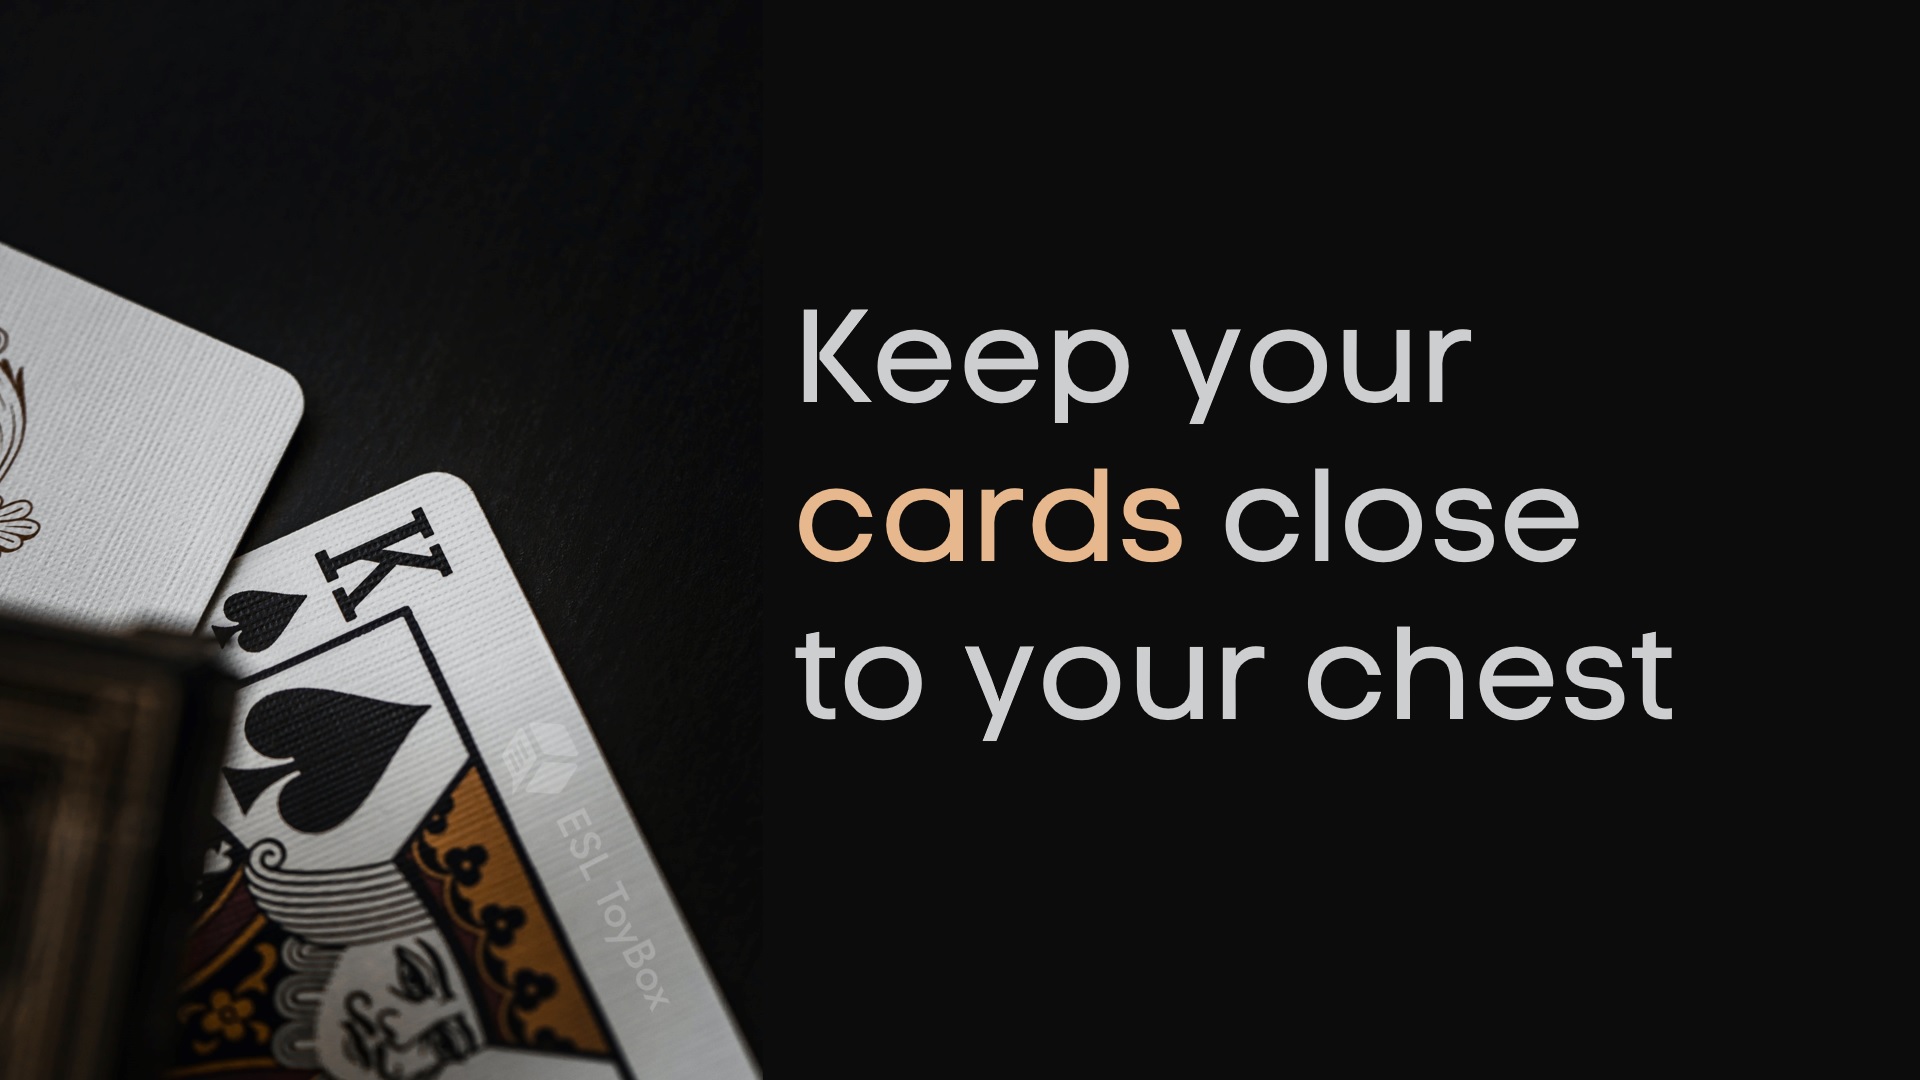 Keep Your Cards Close to Your Chest